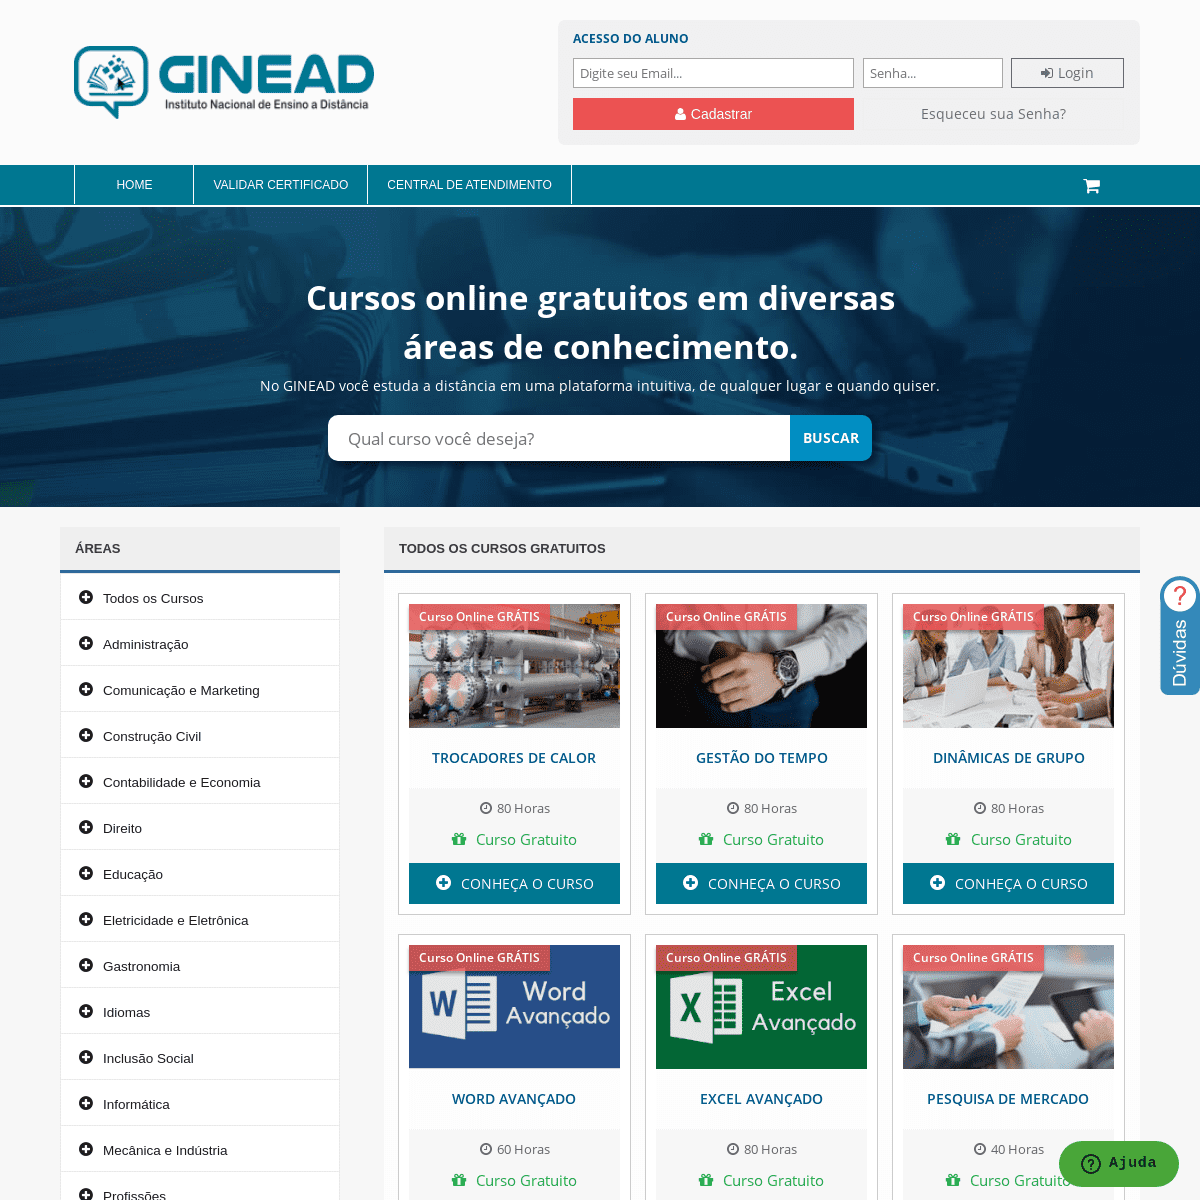 A complete backup of inead.com.br